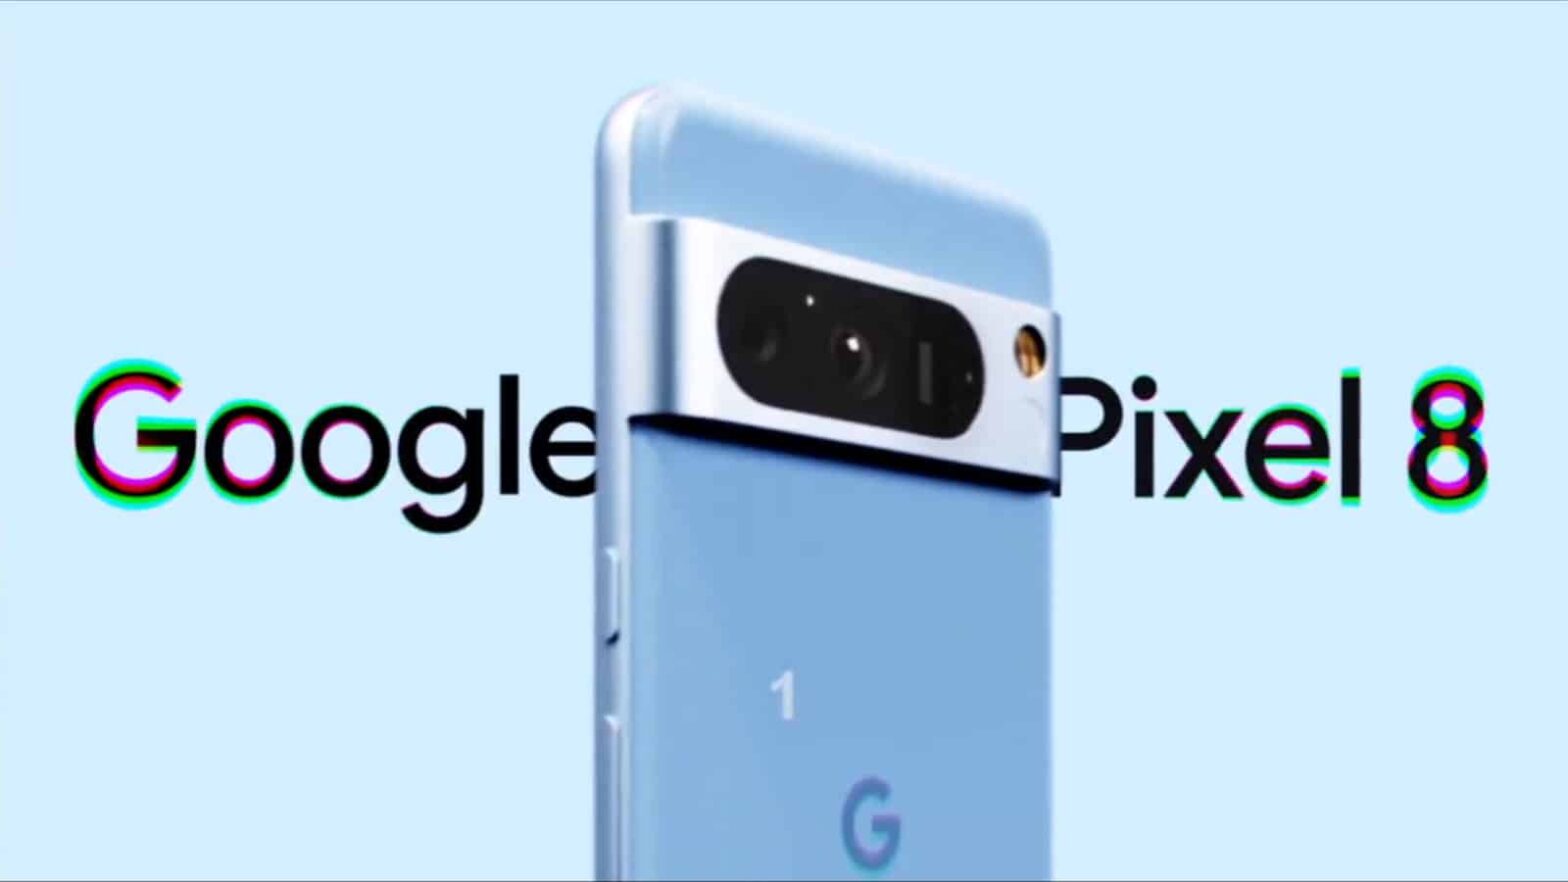 Pixel 8 series will retain the physical SIM slot and come with new Night Sight video